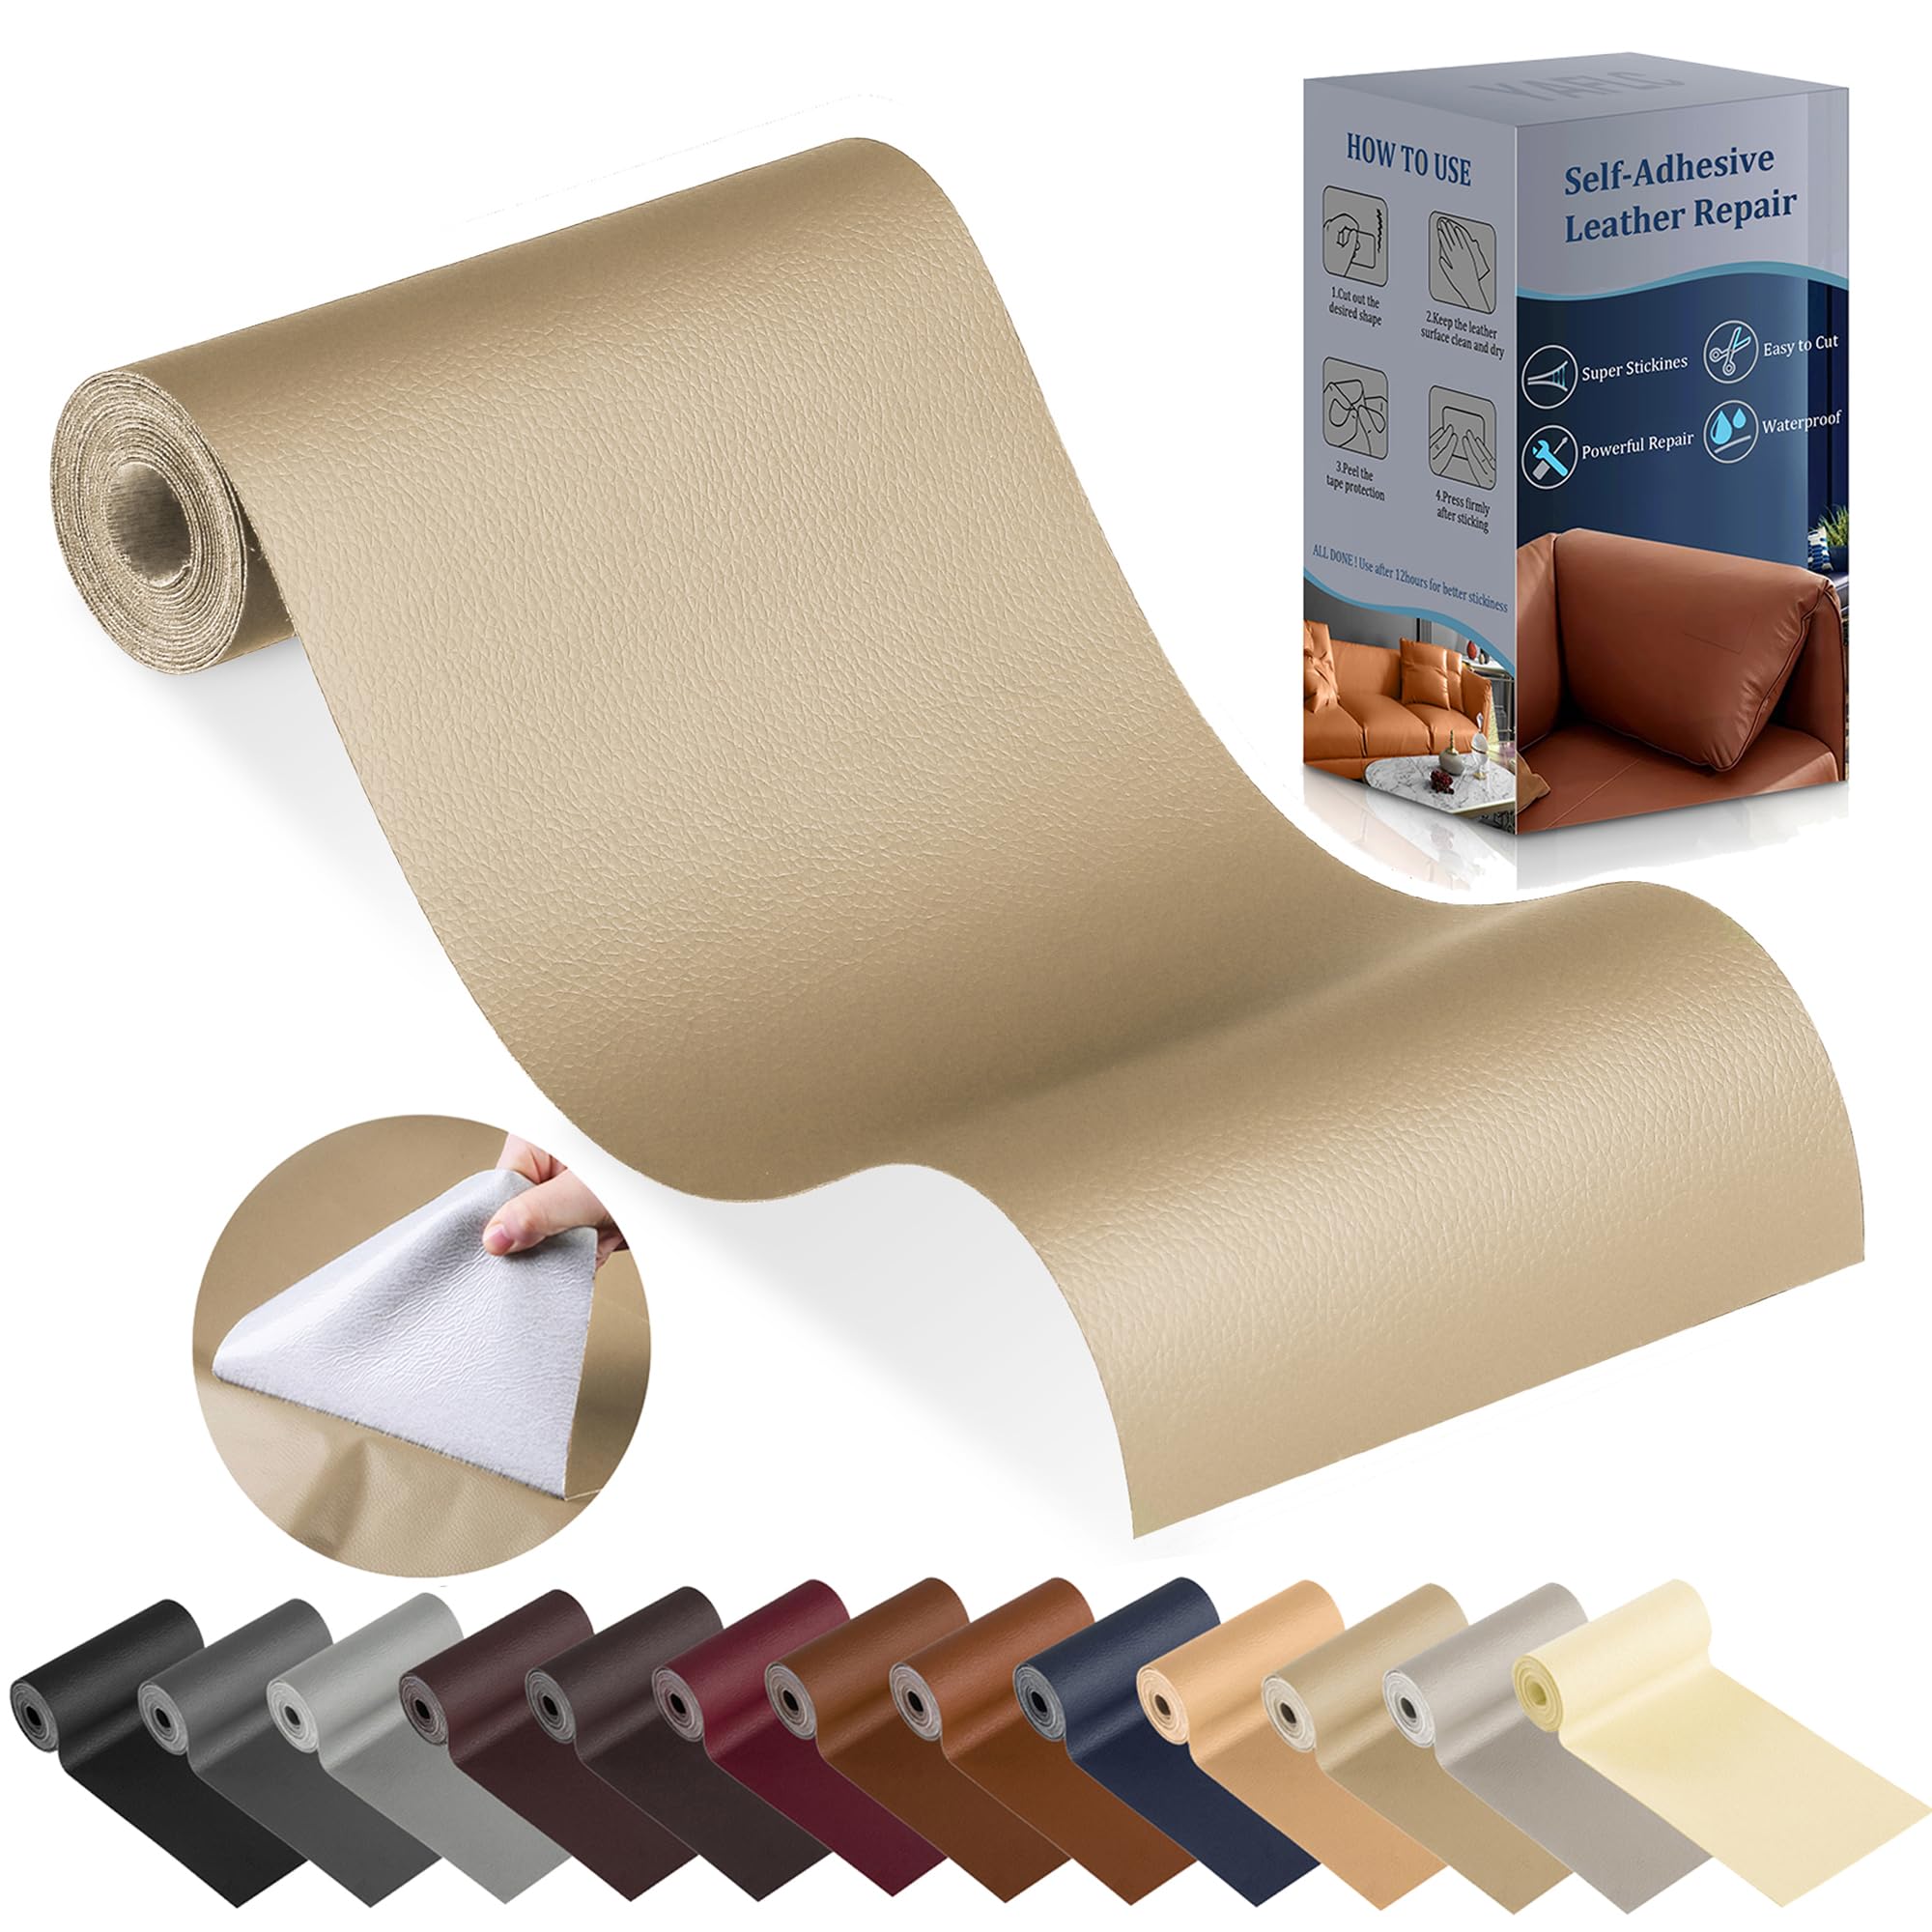 Self-Adhesive PU Leather Repair Patch Tape for Sofa, Couch, Car